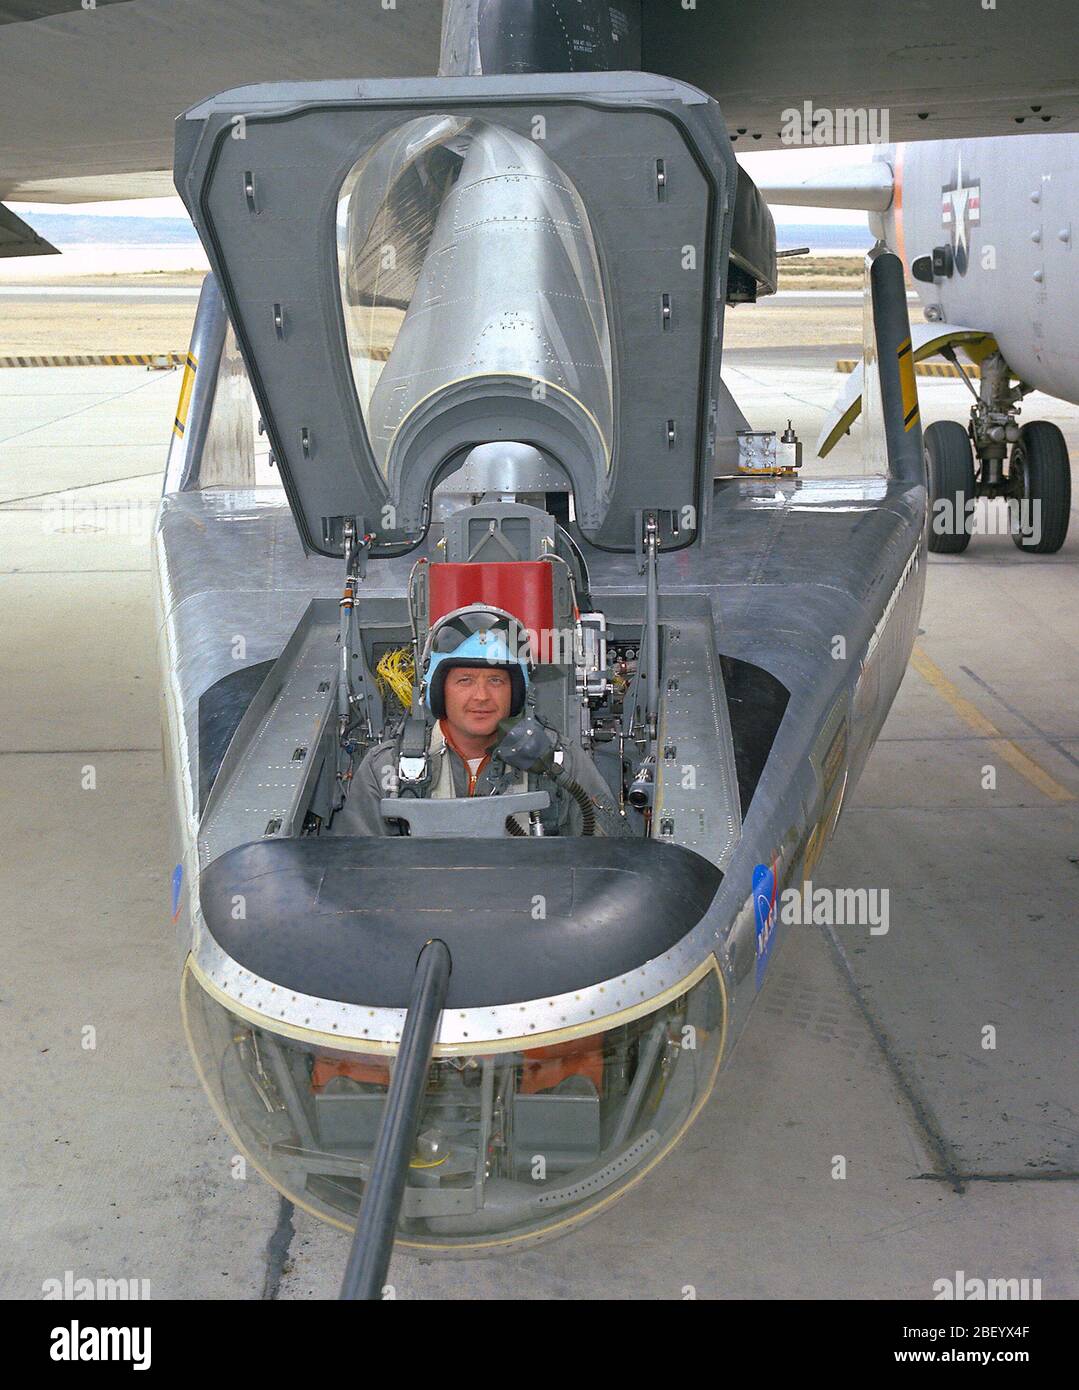 NASA research pilot Milt Thompson sits in the M2-F2 'heavyweight' lifting body research vehicle before a 1966 test flight. The M2-F2 and the other lifting-body designs were all attached to a wing pylon on NASA’s B-52 mothership and carried aloft. The vehicles were then drop-launched and, at the end of their flights, glided back to wheeled landings on the dry lake or runway at Edwards AFB. The lifting body designs influenced the design of the Space Shuttle and were also reincarnated in the design of the X-38 in the 1990s. Stock Photo